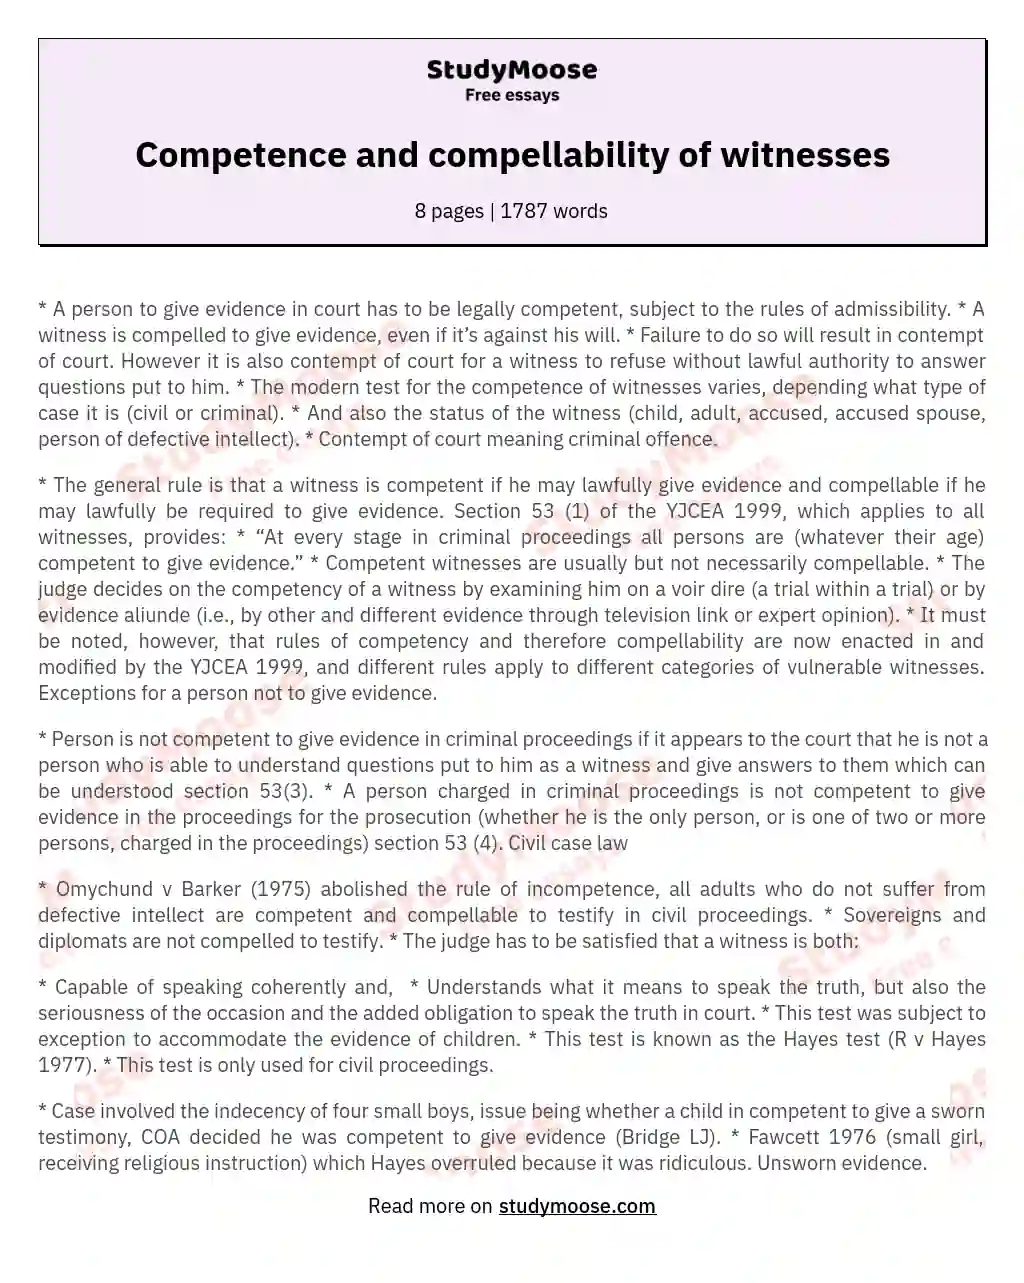 Competence and compellability of witnesses essay